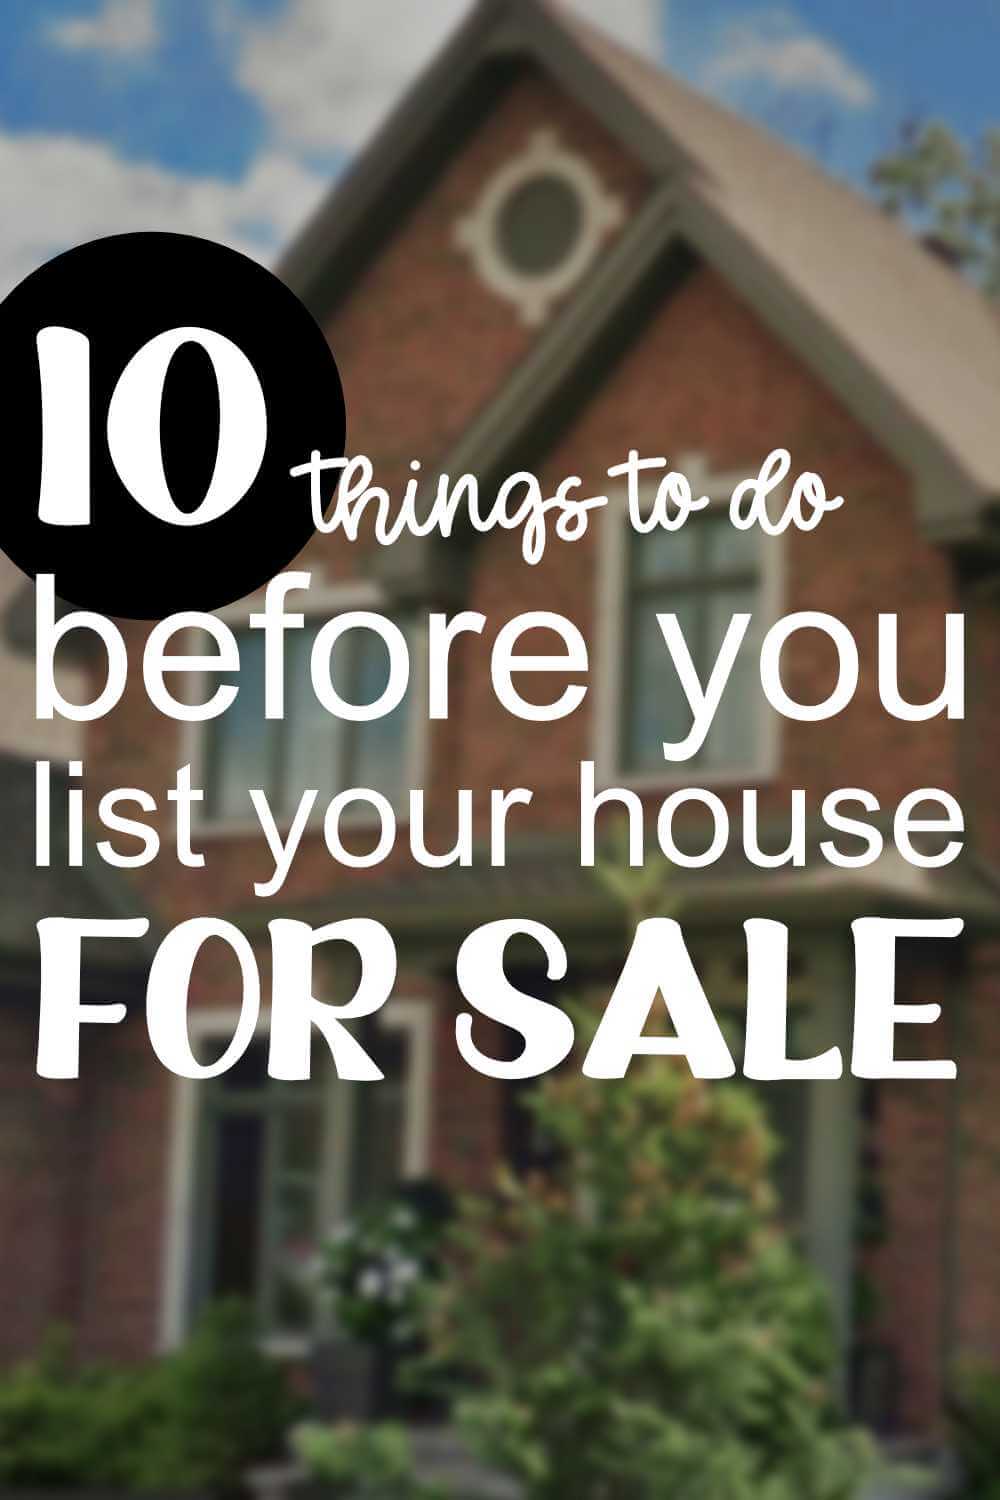 https://sunshineandrainydays.com/wp-content/uploads/2023/02/10-Things-To-Do-Before-You-List-Your-House-For-Sale-P_1.jpg